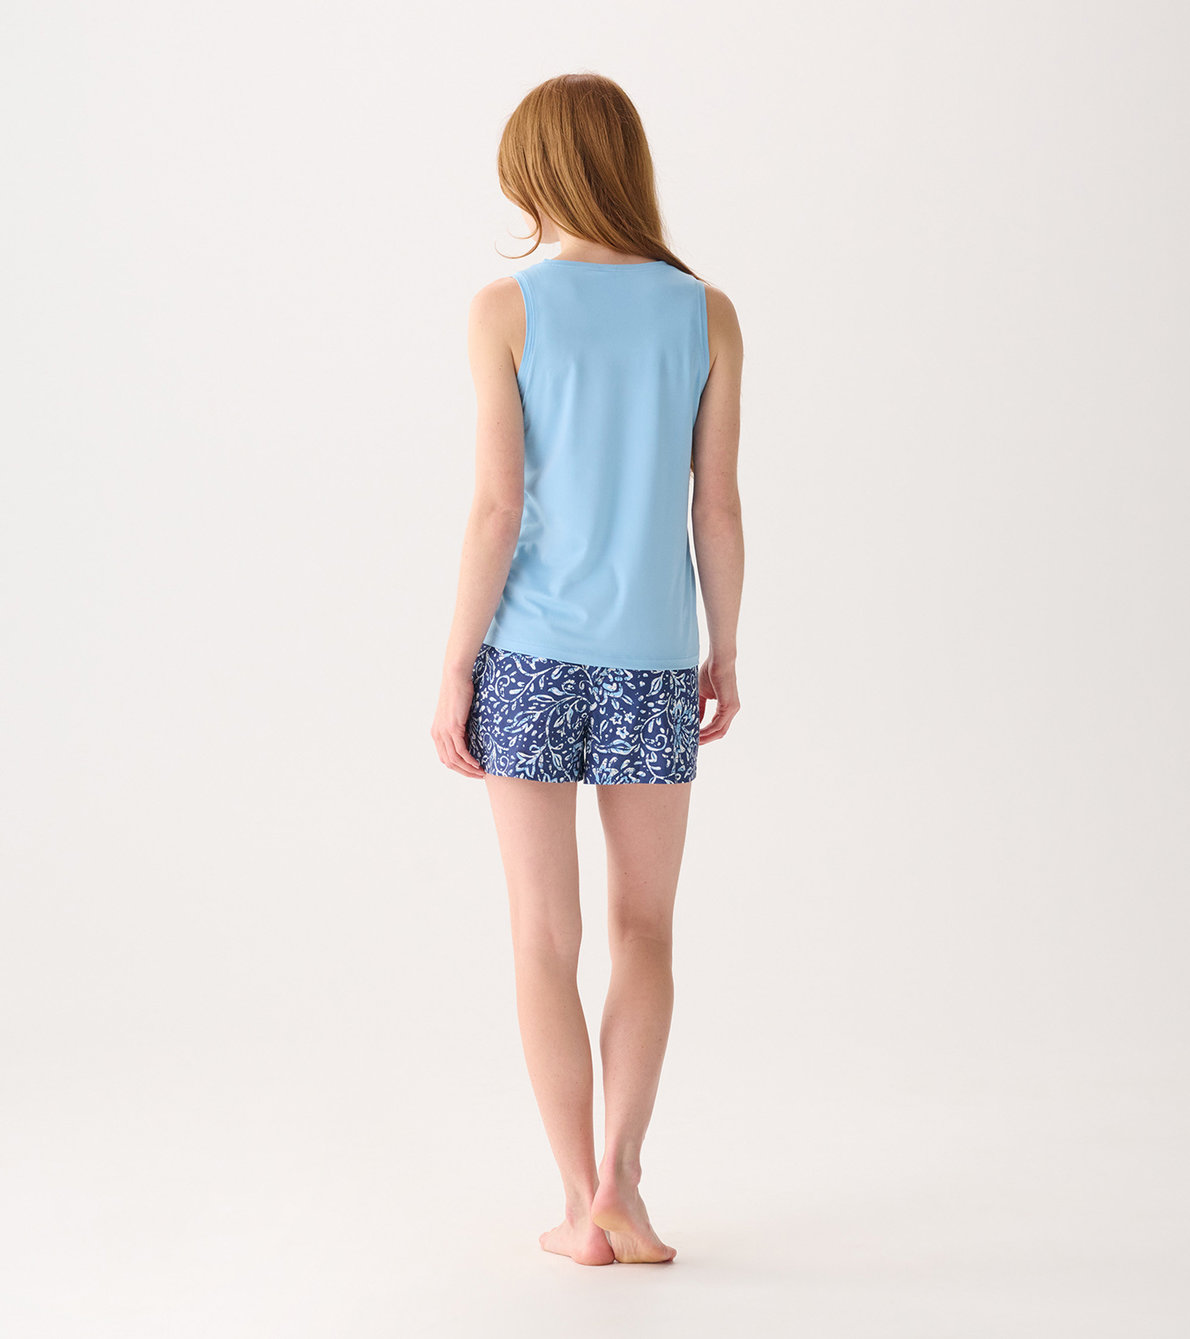 View larger image of Capelton Road Women's Batik Flowers Tank Top and Shorts